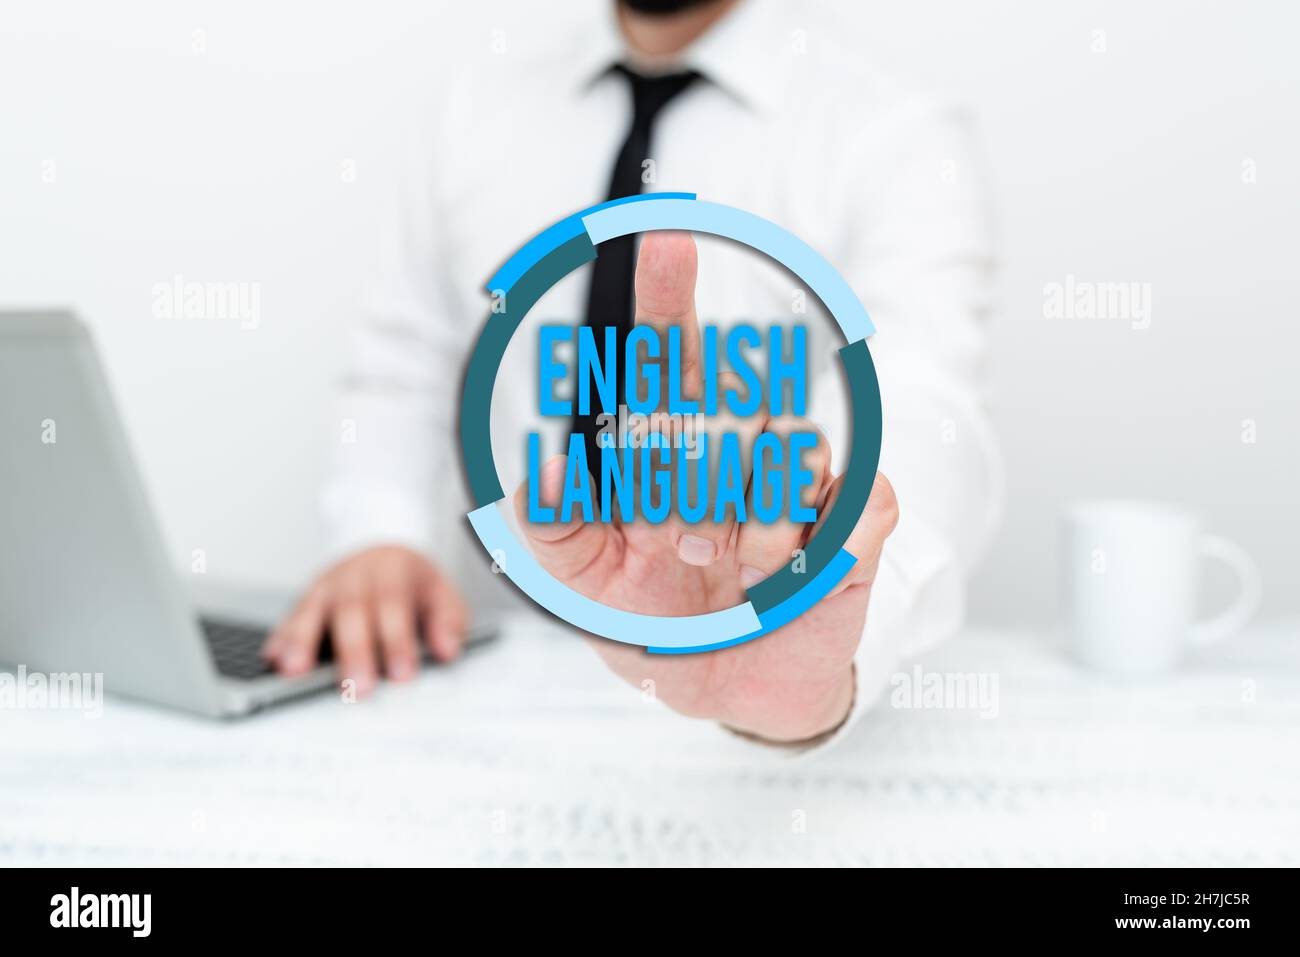 Inspiration showing sign English Language. Business concept third spoken native lang in world after Chinese and Spanish Remote Office Work Online Stock Photo